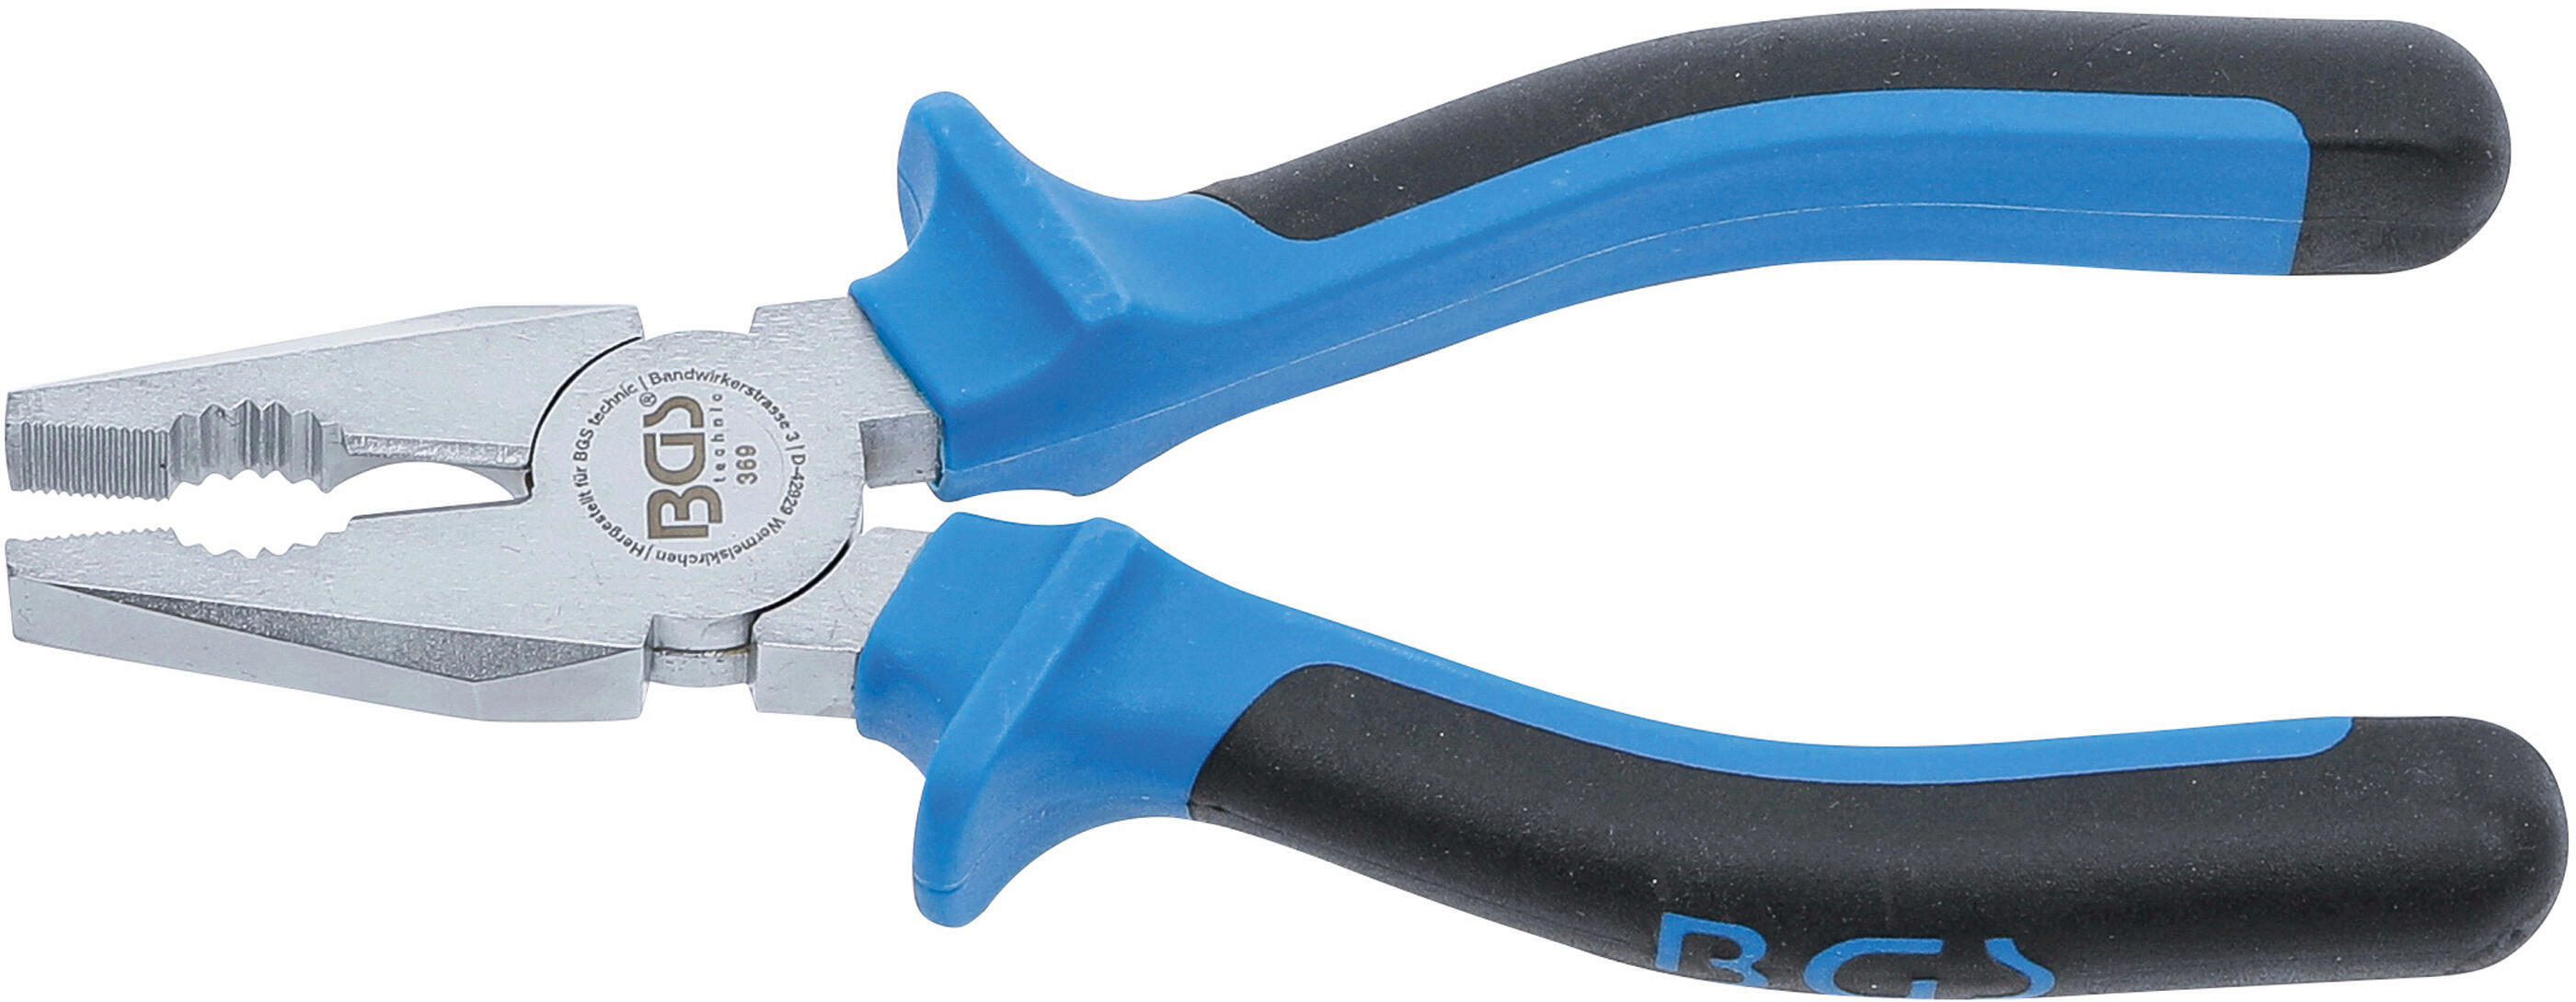 BGS Combination Pliers